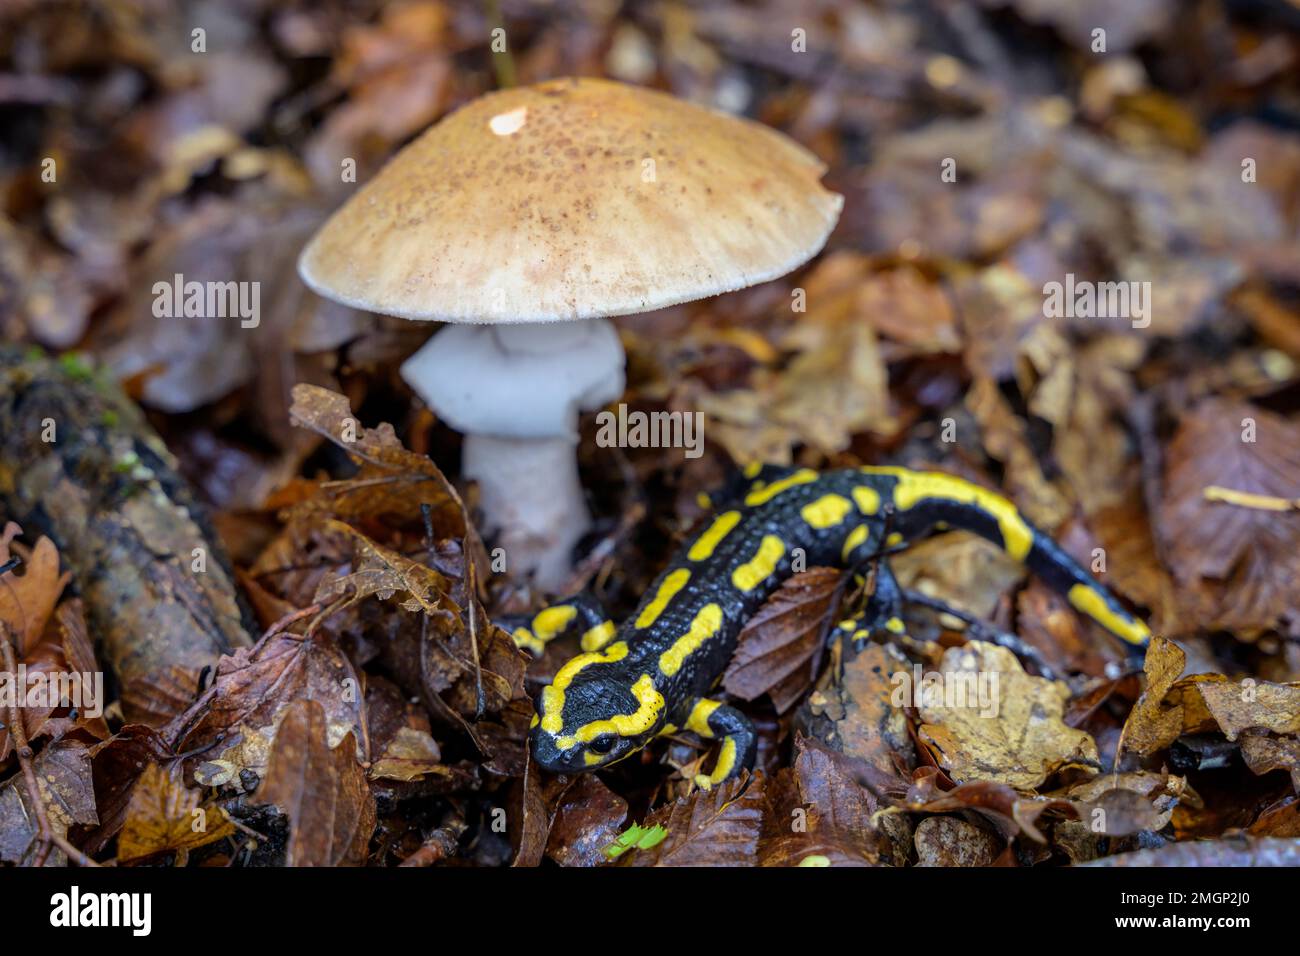 Speckled salamander (Salamandra salamandra) and Death Cap (Amanita phalloides) : two toxic species in forest, France Stock Photo